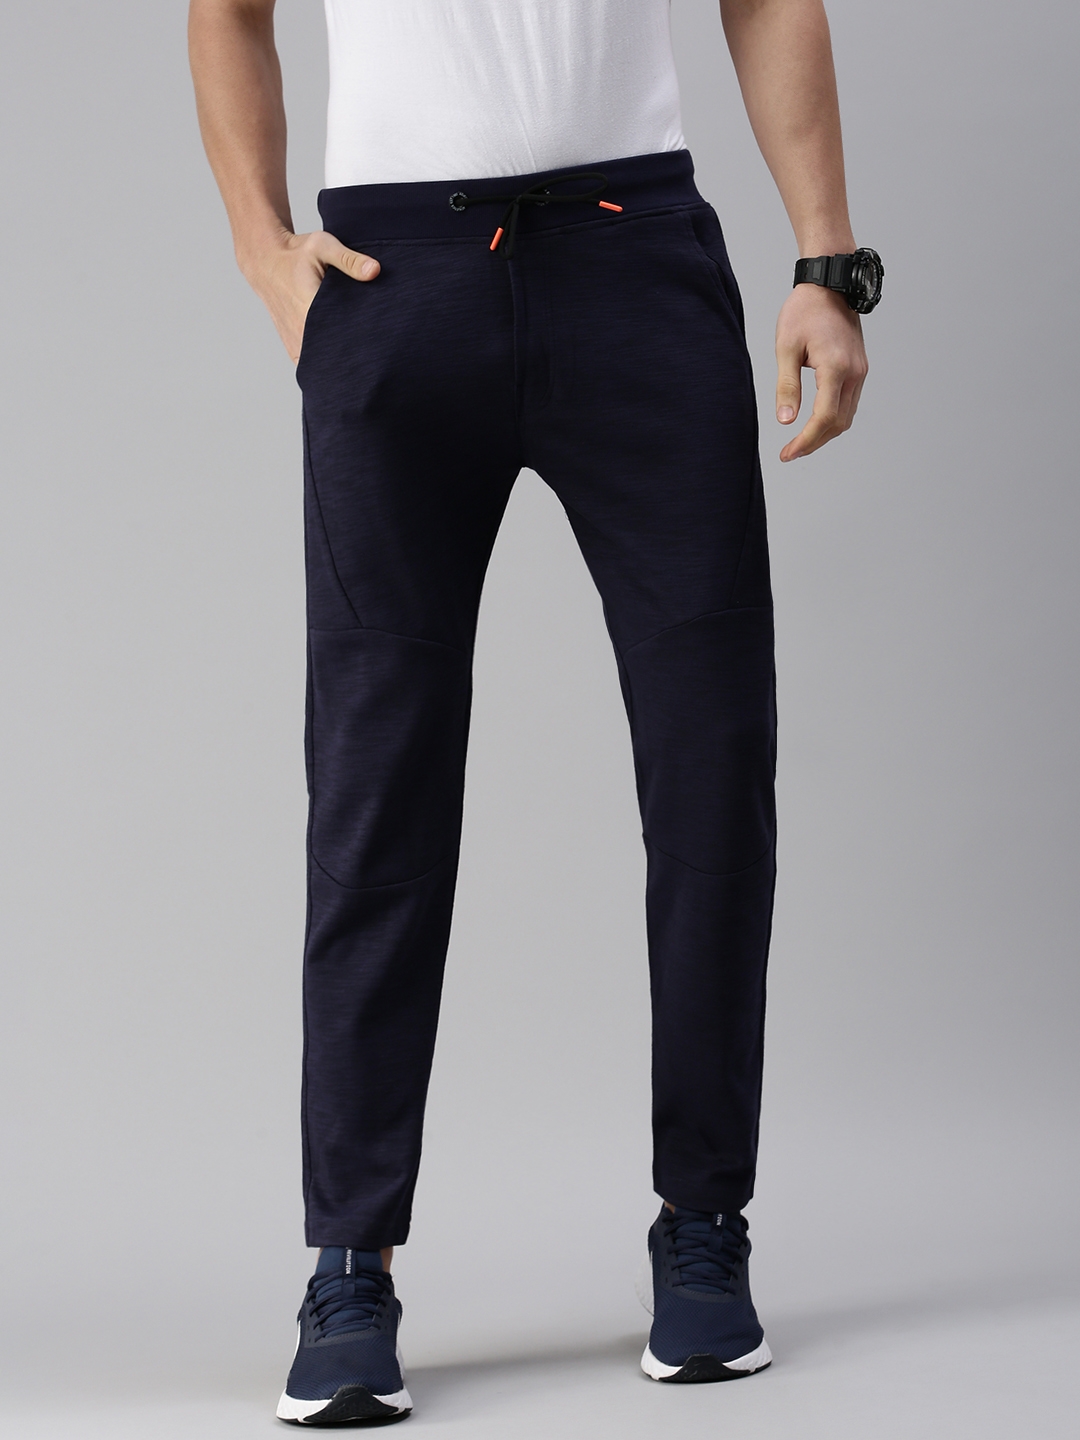 SHOWOFF Men's Solid Cotton Navy Blue Straight Fit Track Pants